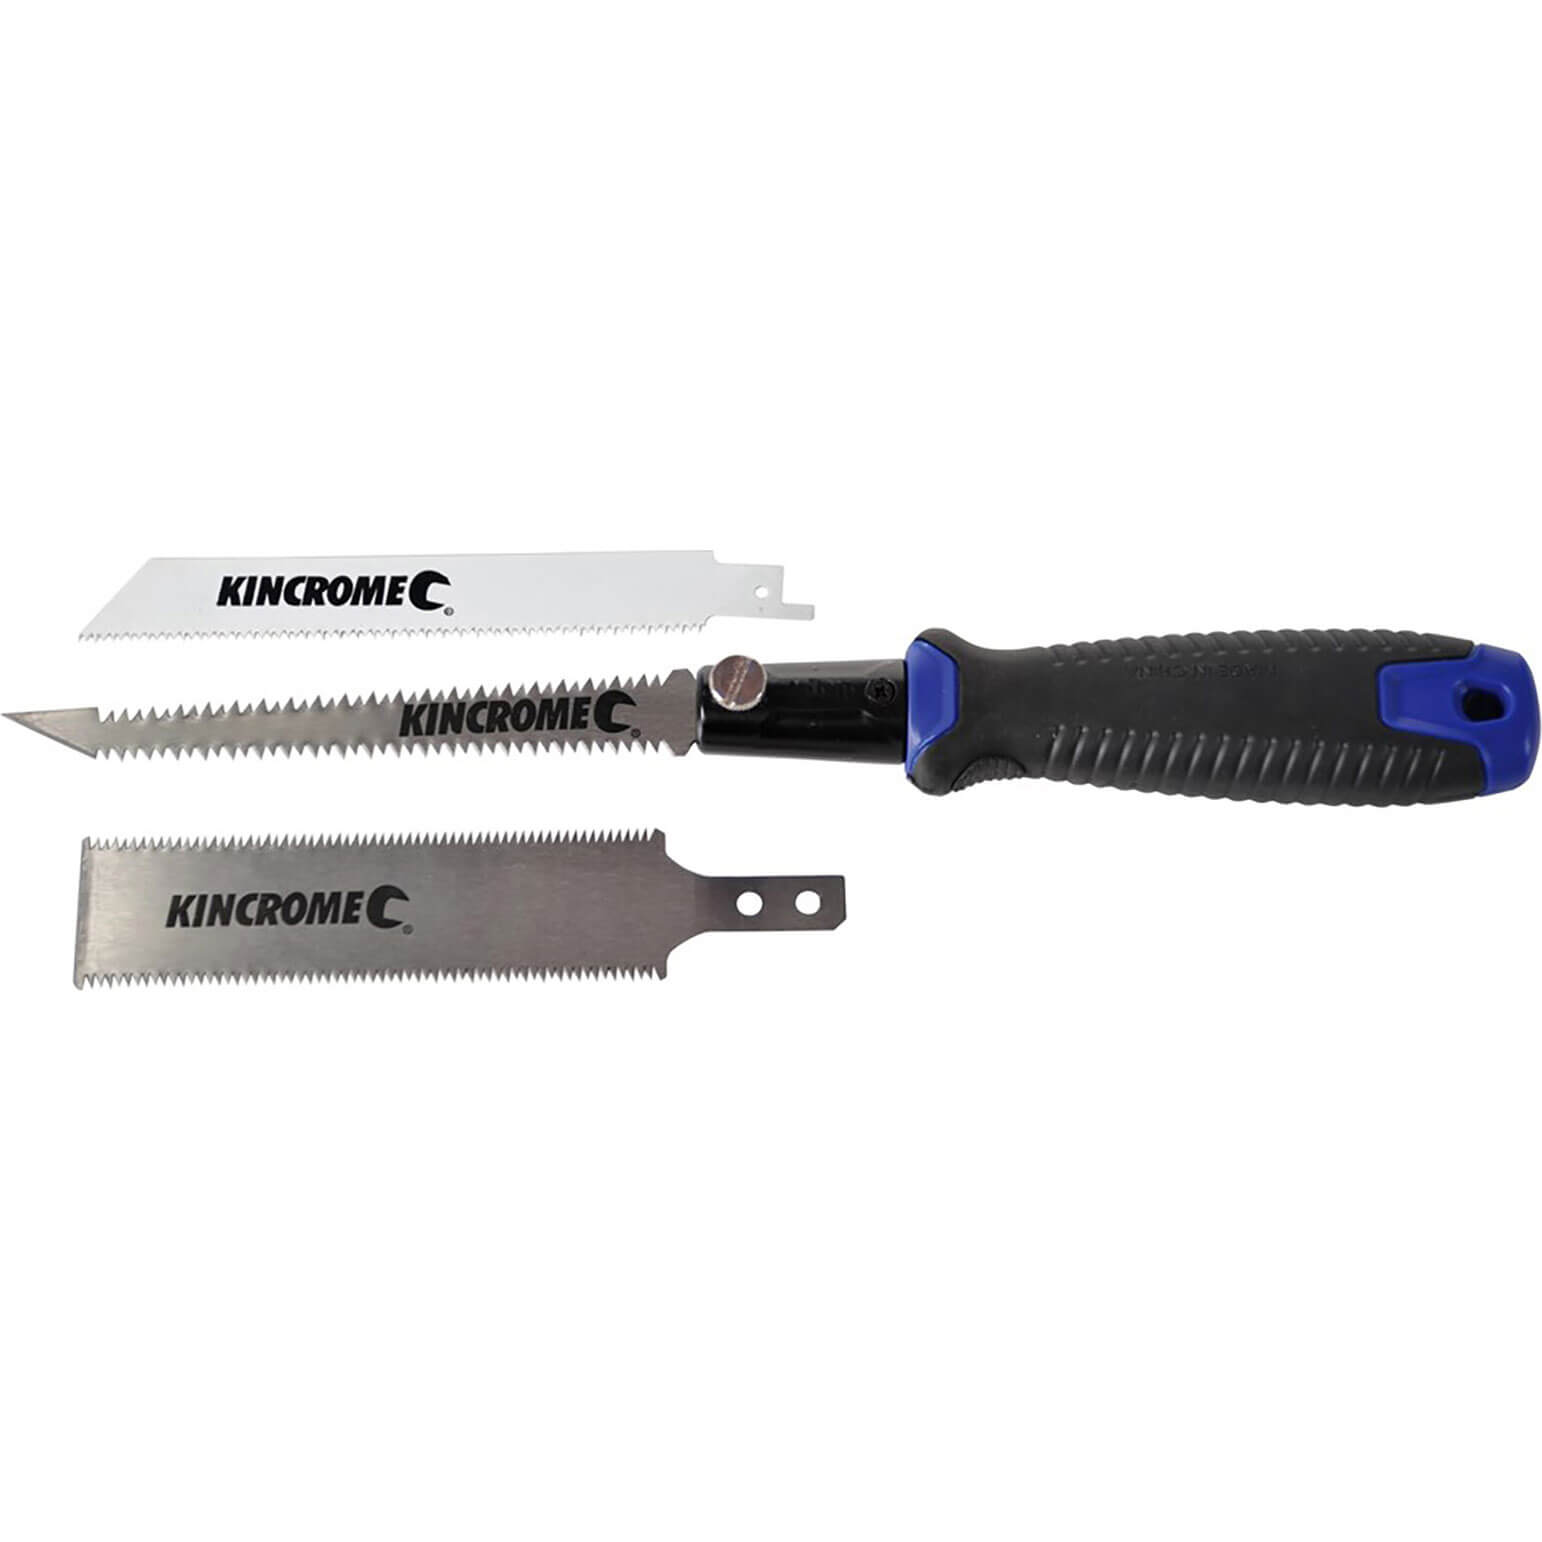 Image of Kincrome 3 in 1 Wood and Plaster Multi Saw